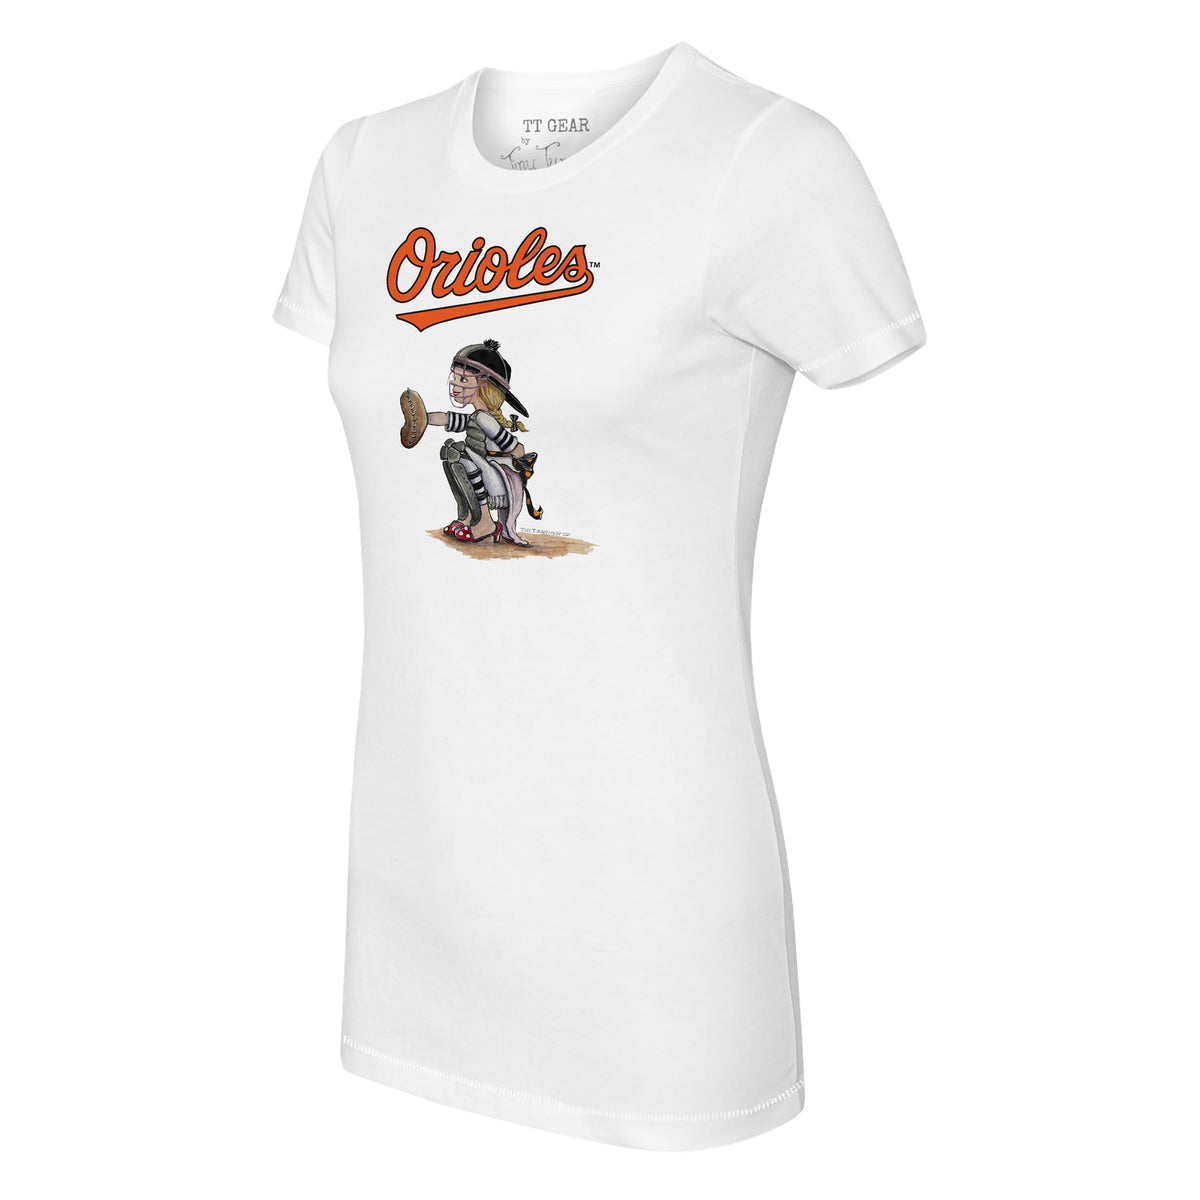 Baltimore Orioles Kate the Catcher Tee Shirt